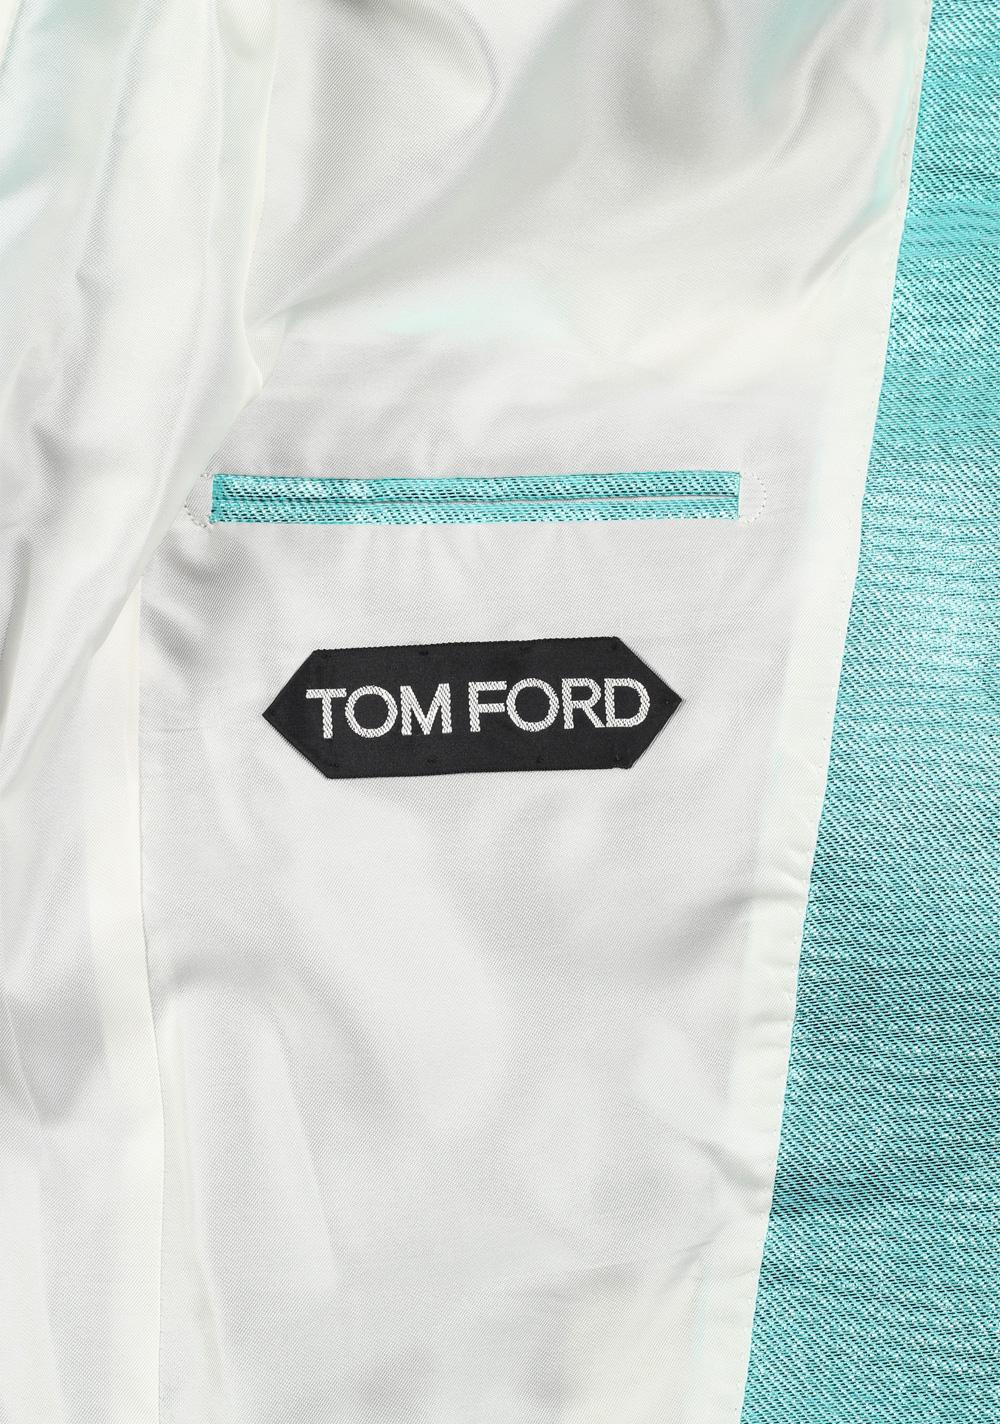 TOM FORD Atticus Turquoise Tuxedo Dinner Jacket Size 46 / 36R U.S. | Costume Limité